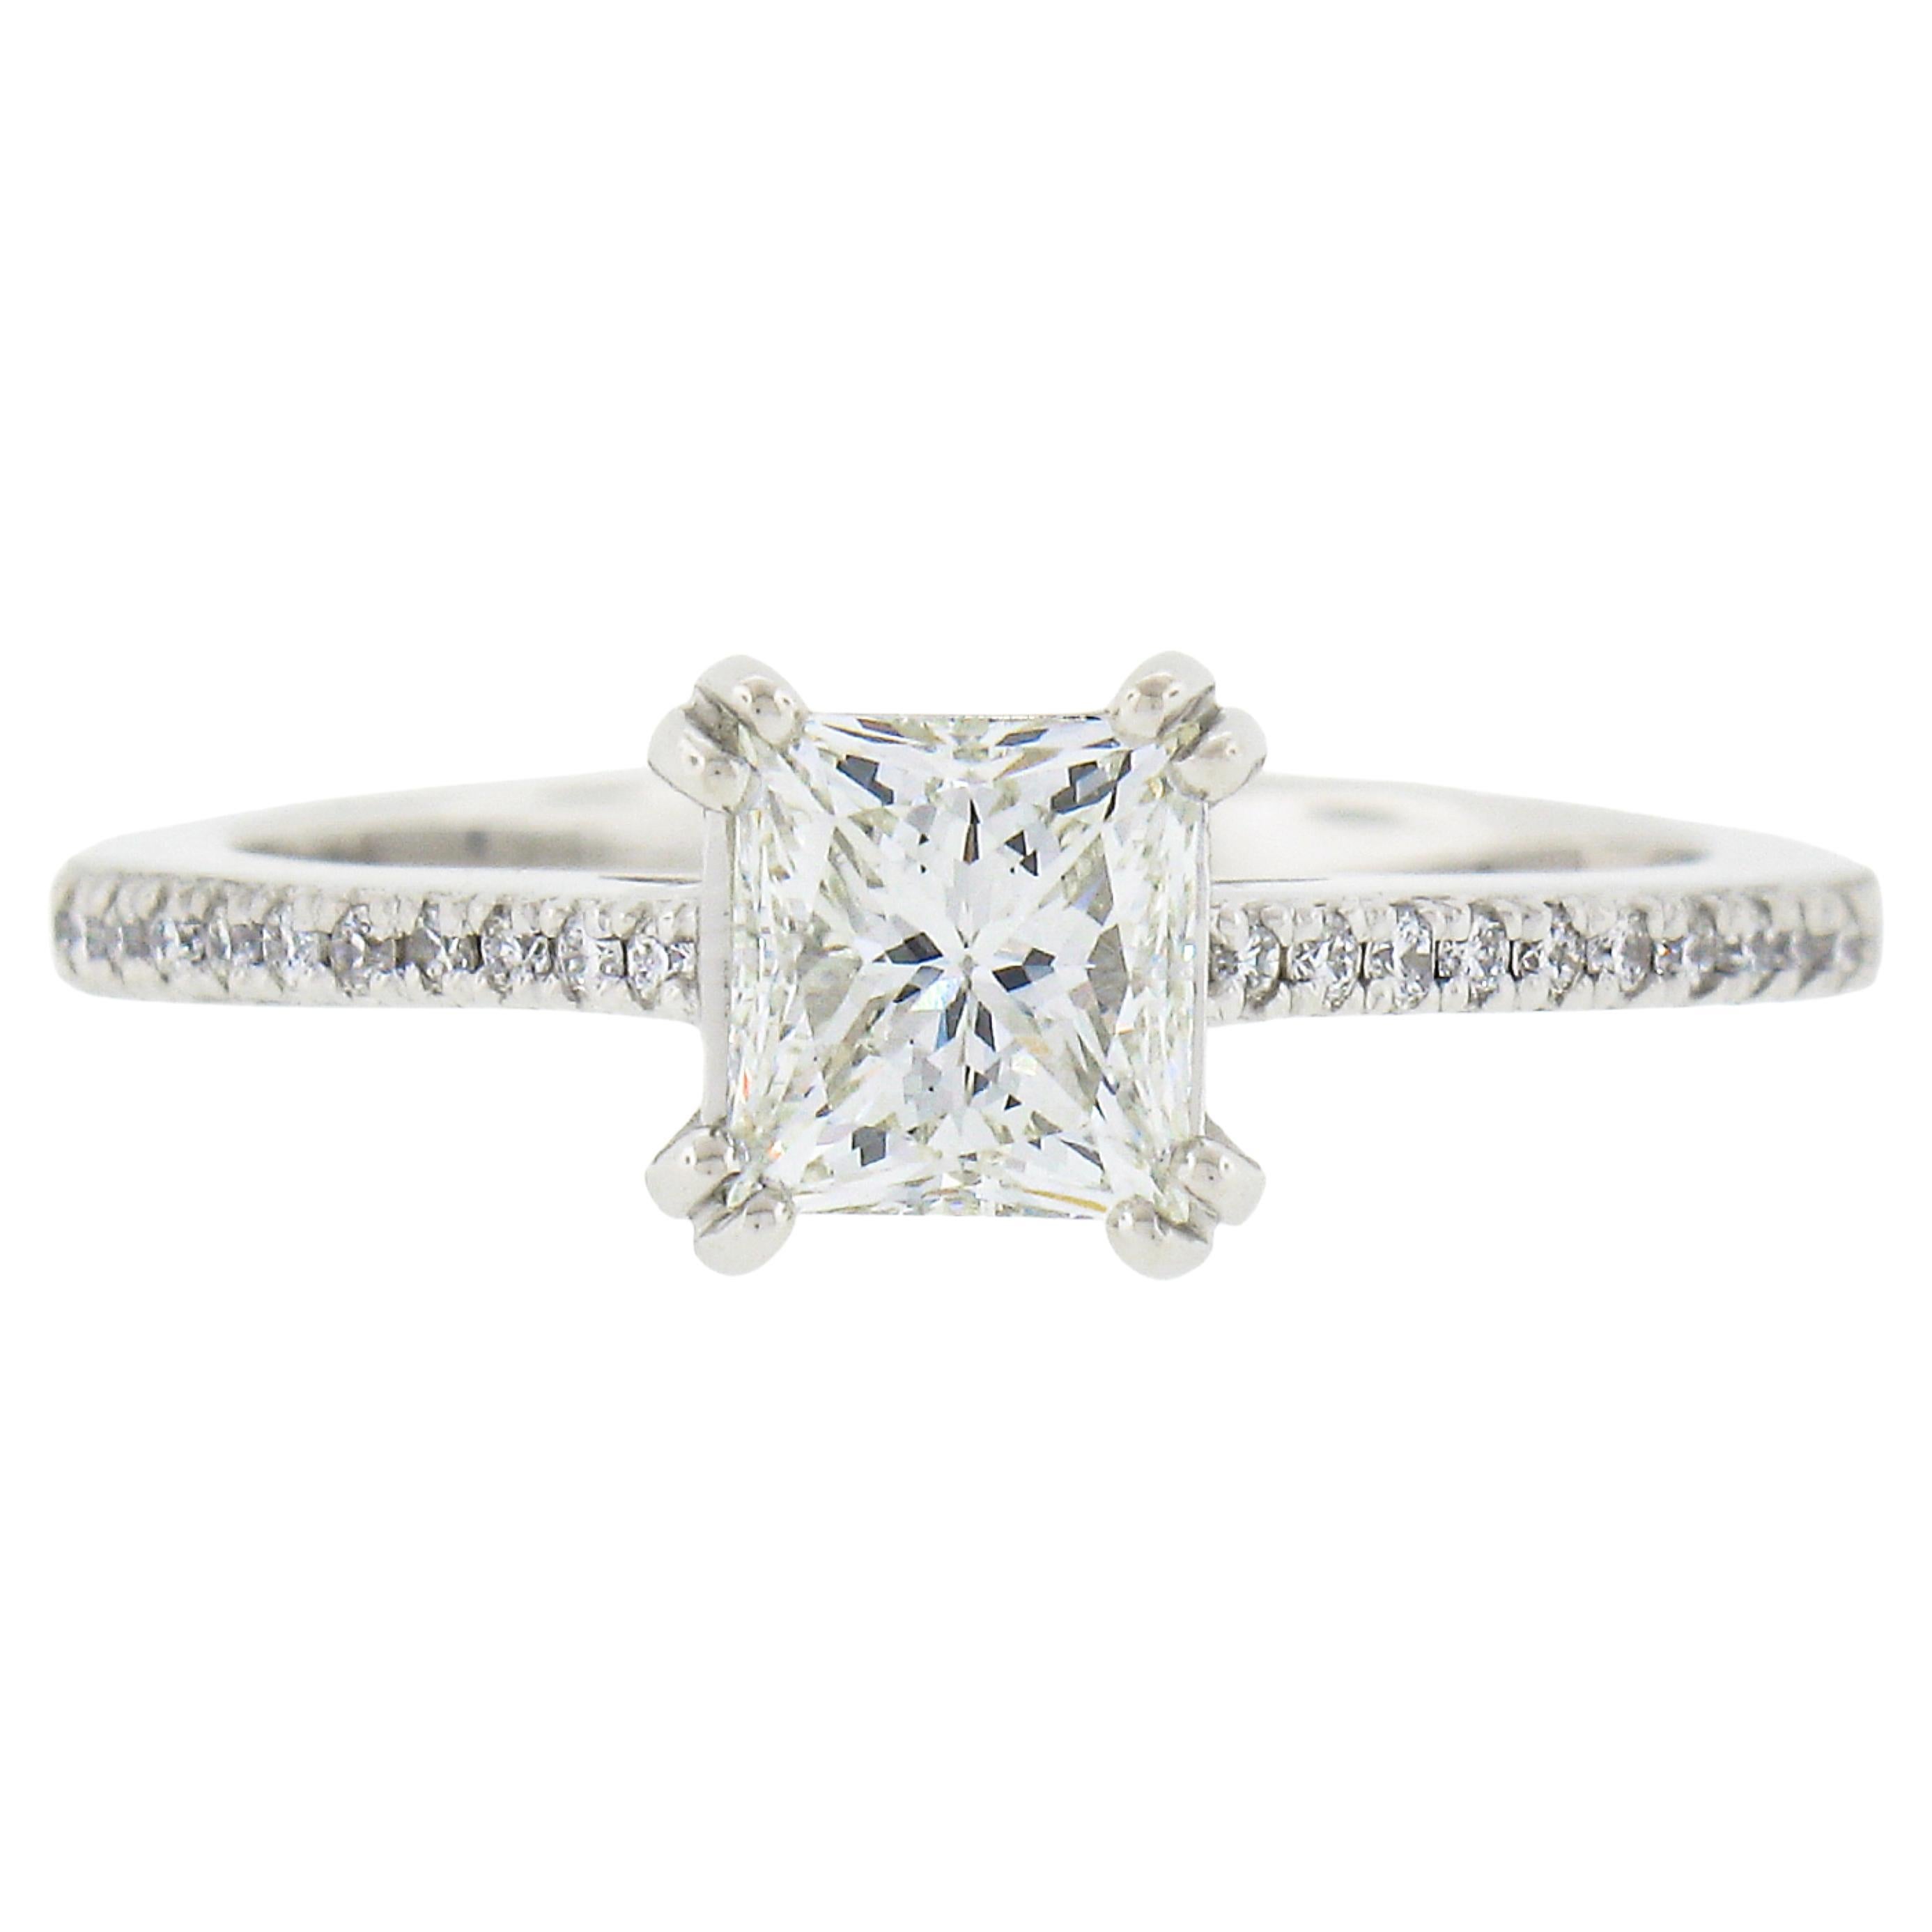 New 14k White Gold 1.12ctw GIA Princess Cut Diamond Solitaire Engagement Ring For Sale